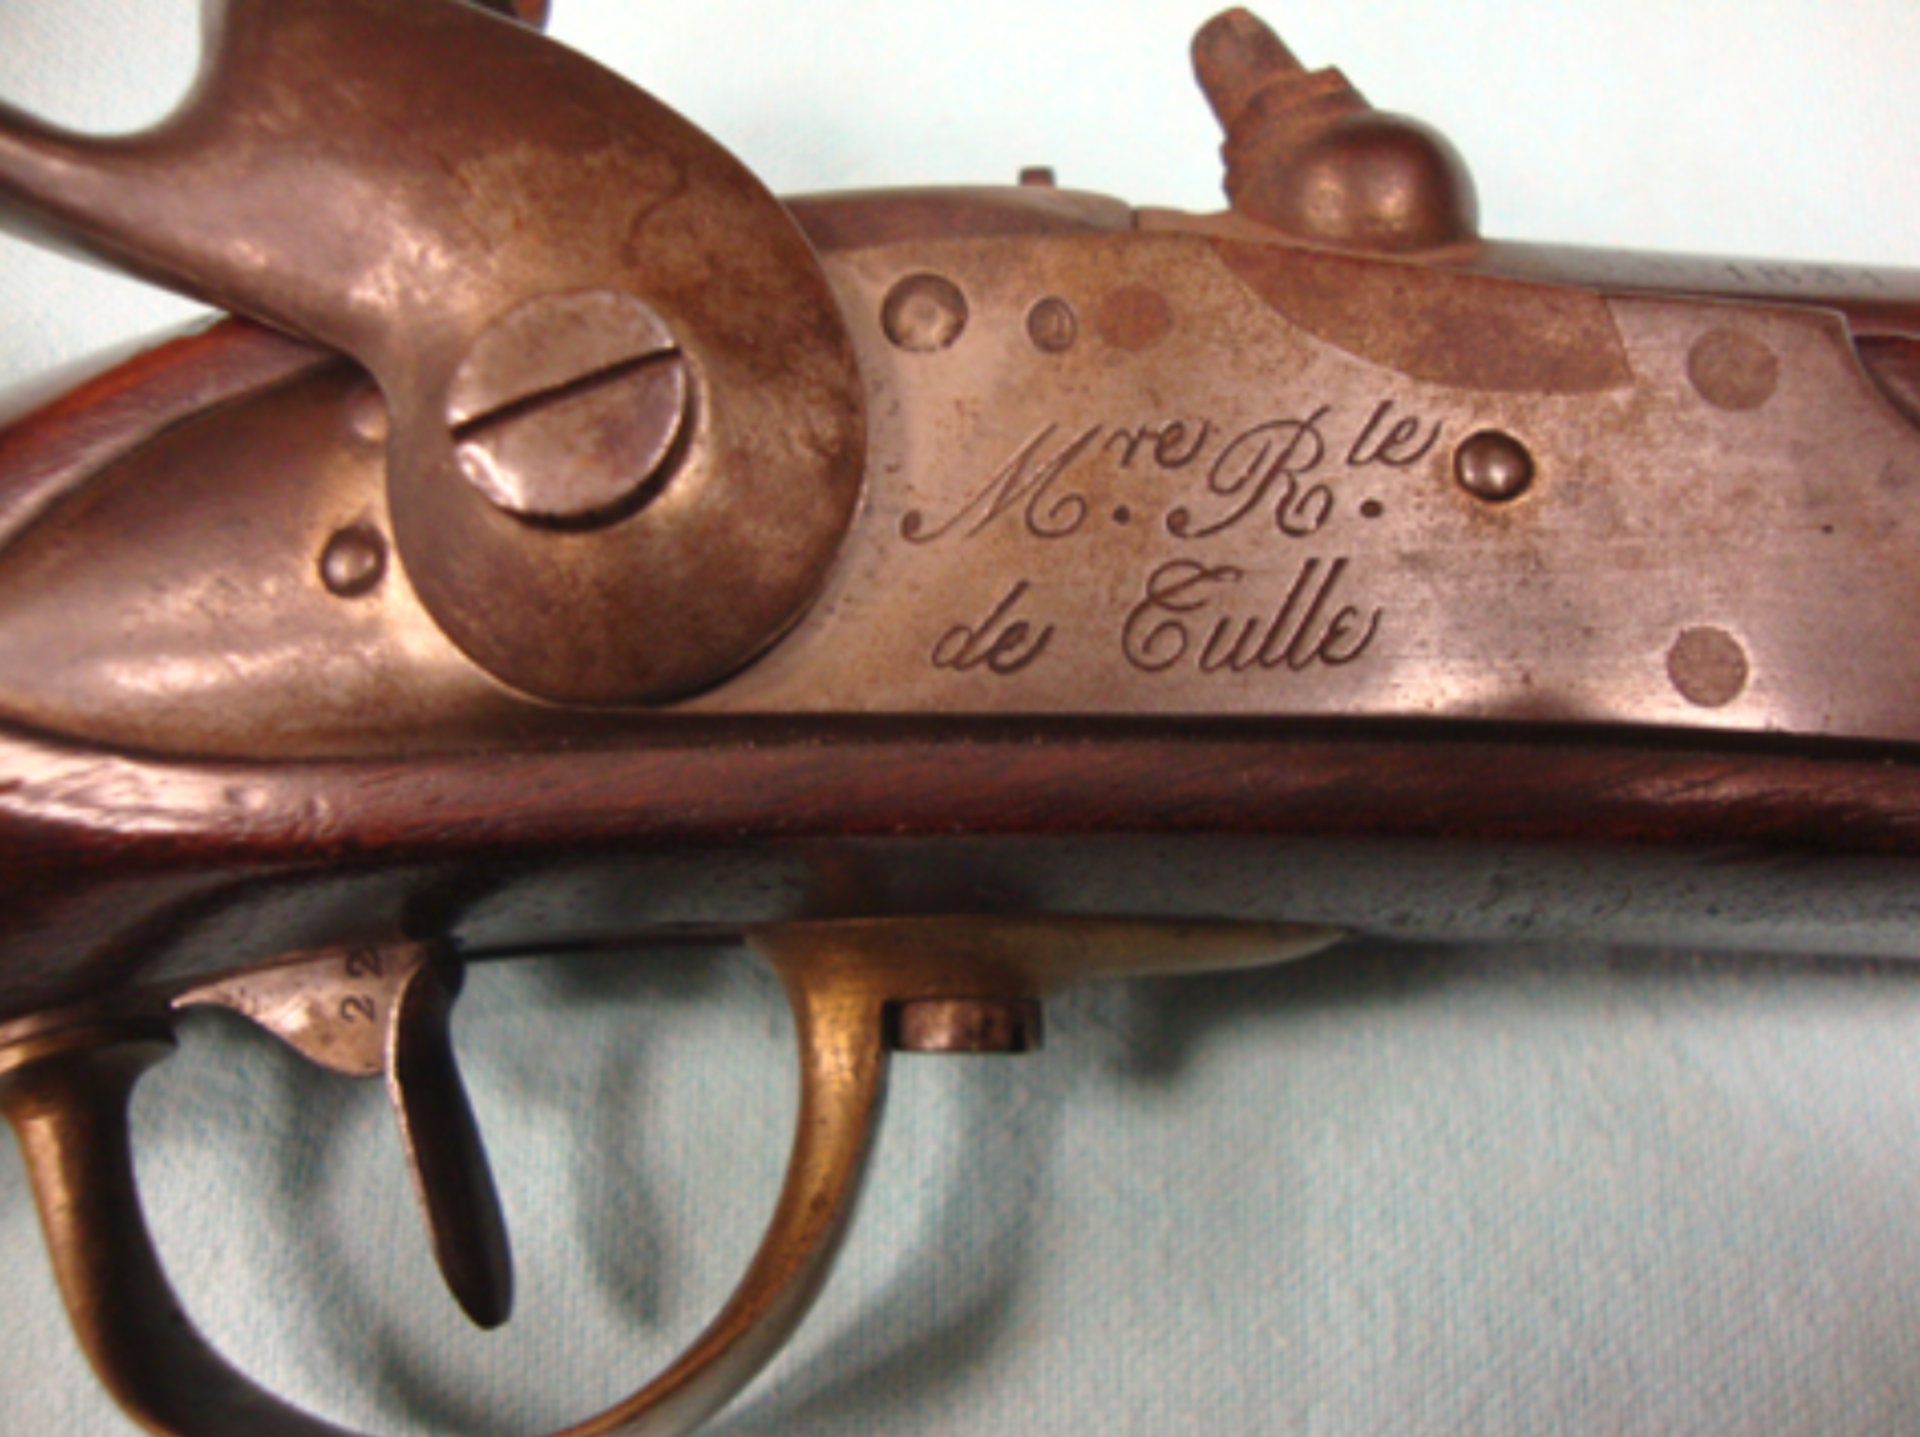 1831 French Model 1822 Challerault Cavalry Pistol Converted from Flintlock to Percussion. - Bild 3 aus 3